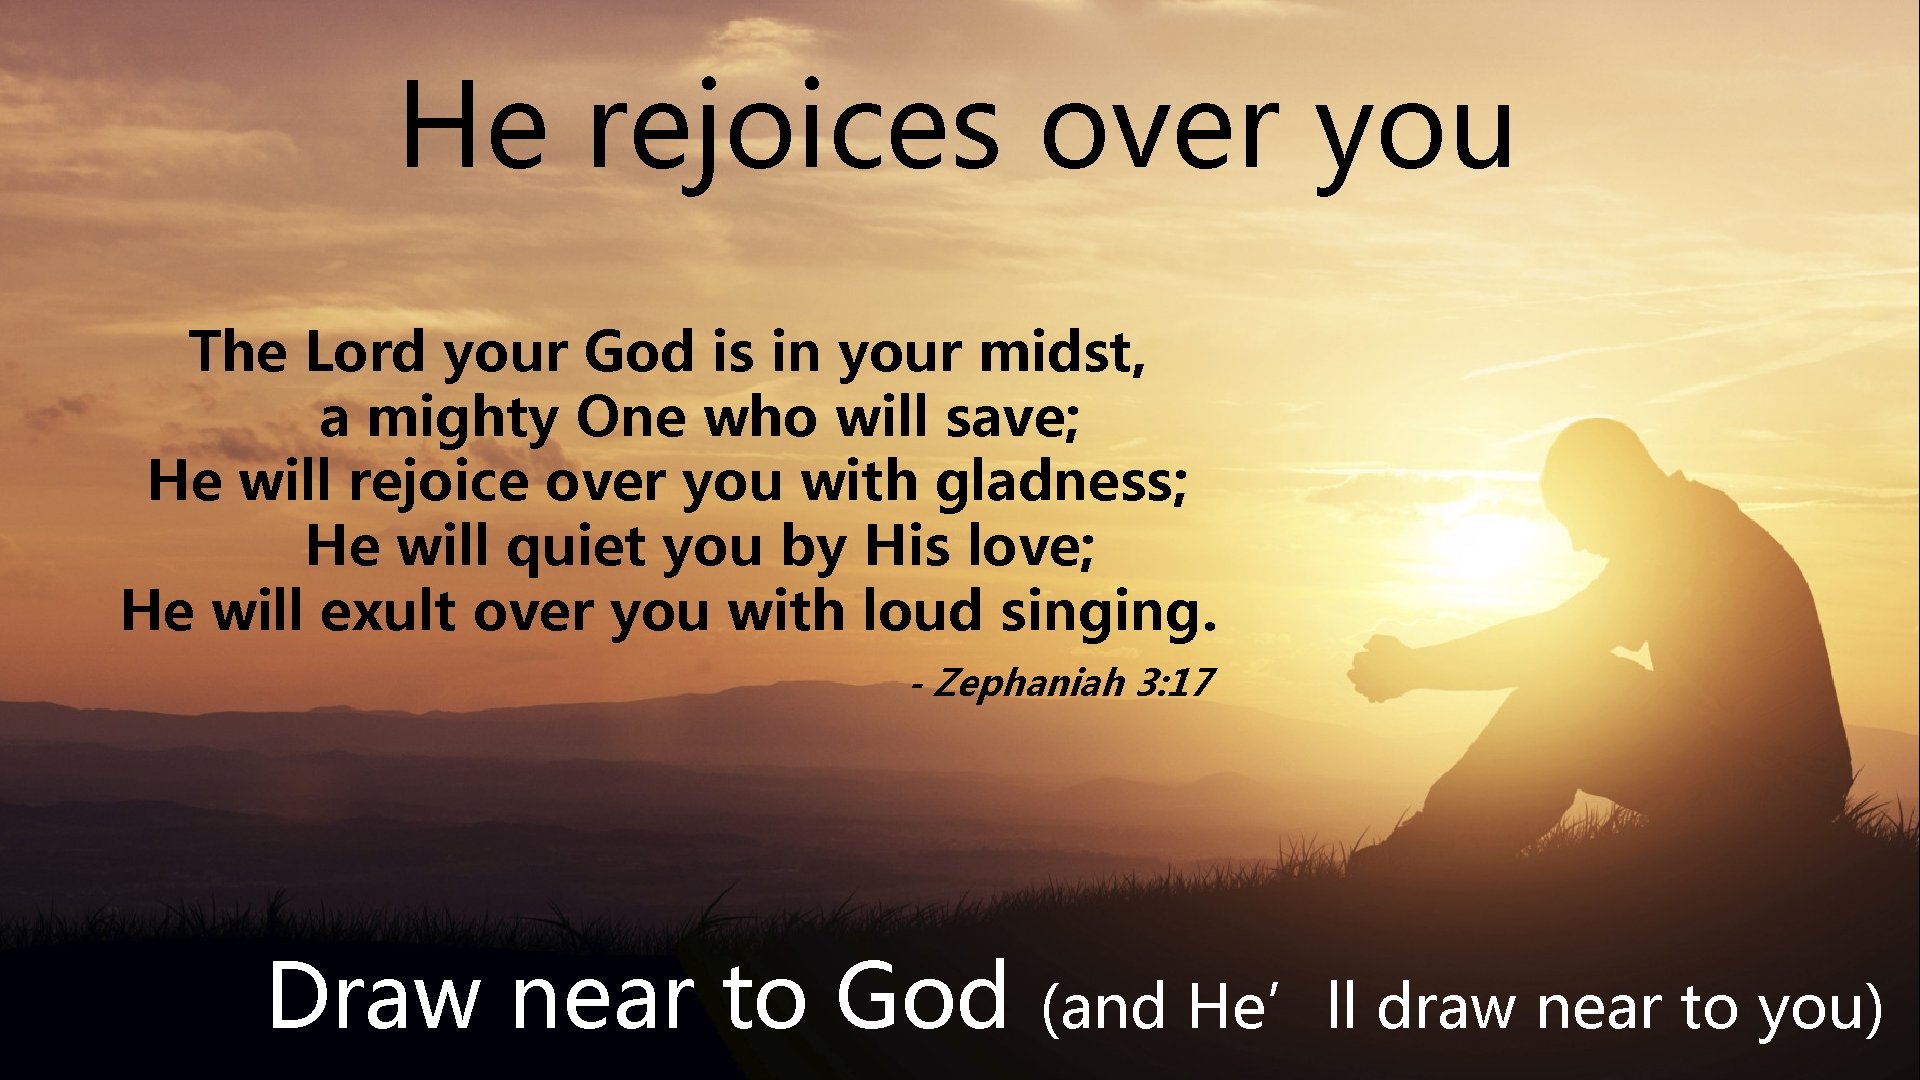 He rejoices over you The Lord your God is in your midst, a mighty